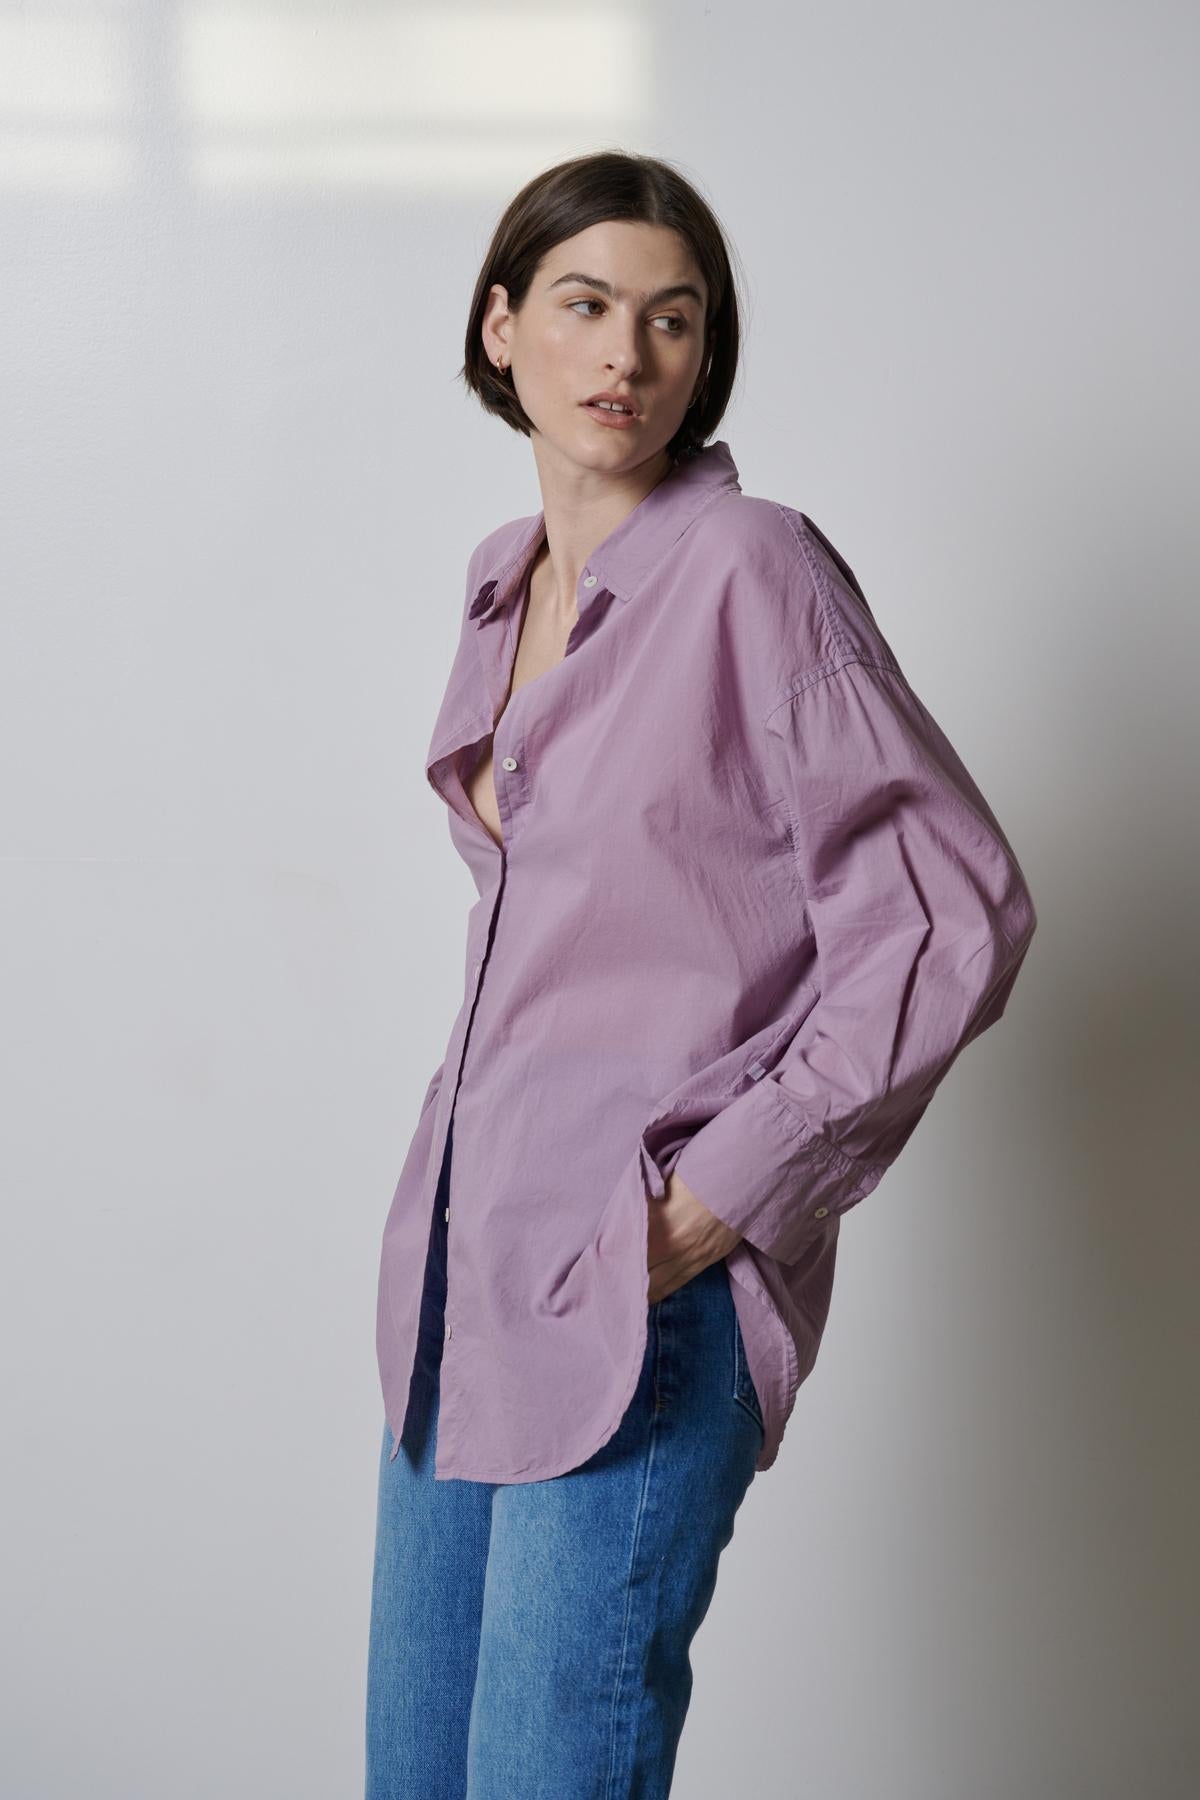 The model is wearing a Velvet by Jenny Graham REDONDO BUTTON-UP SHIRT and jeans.-35783066091713